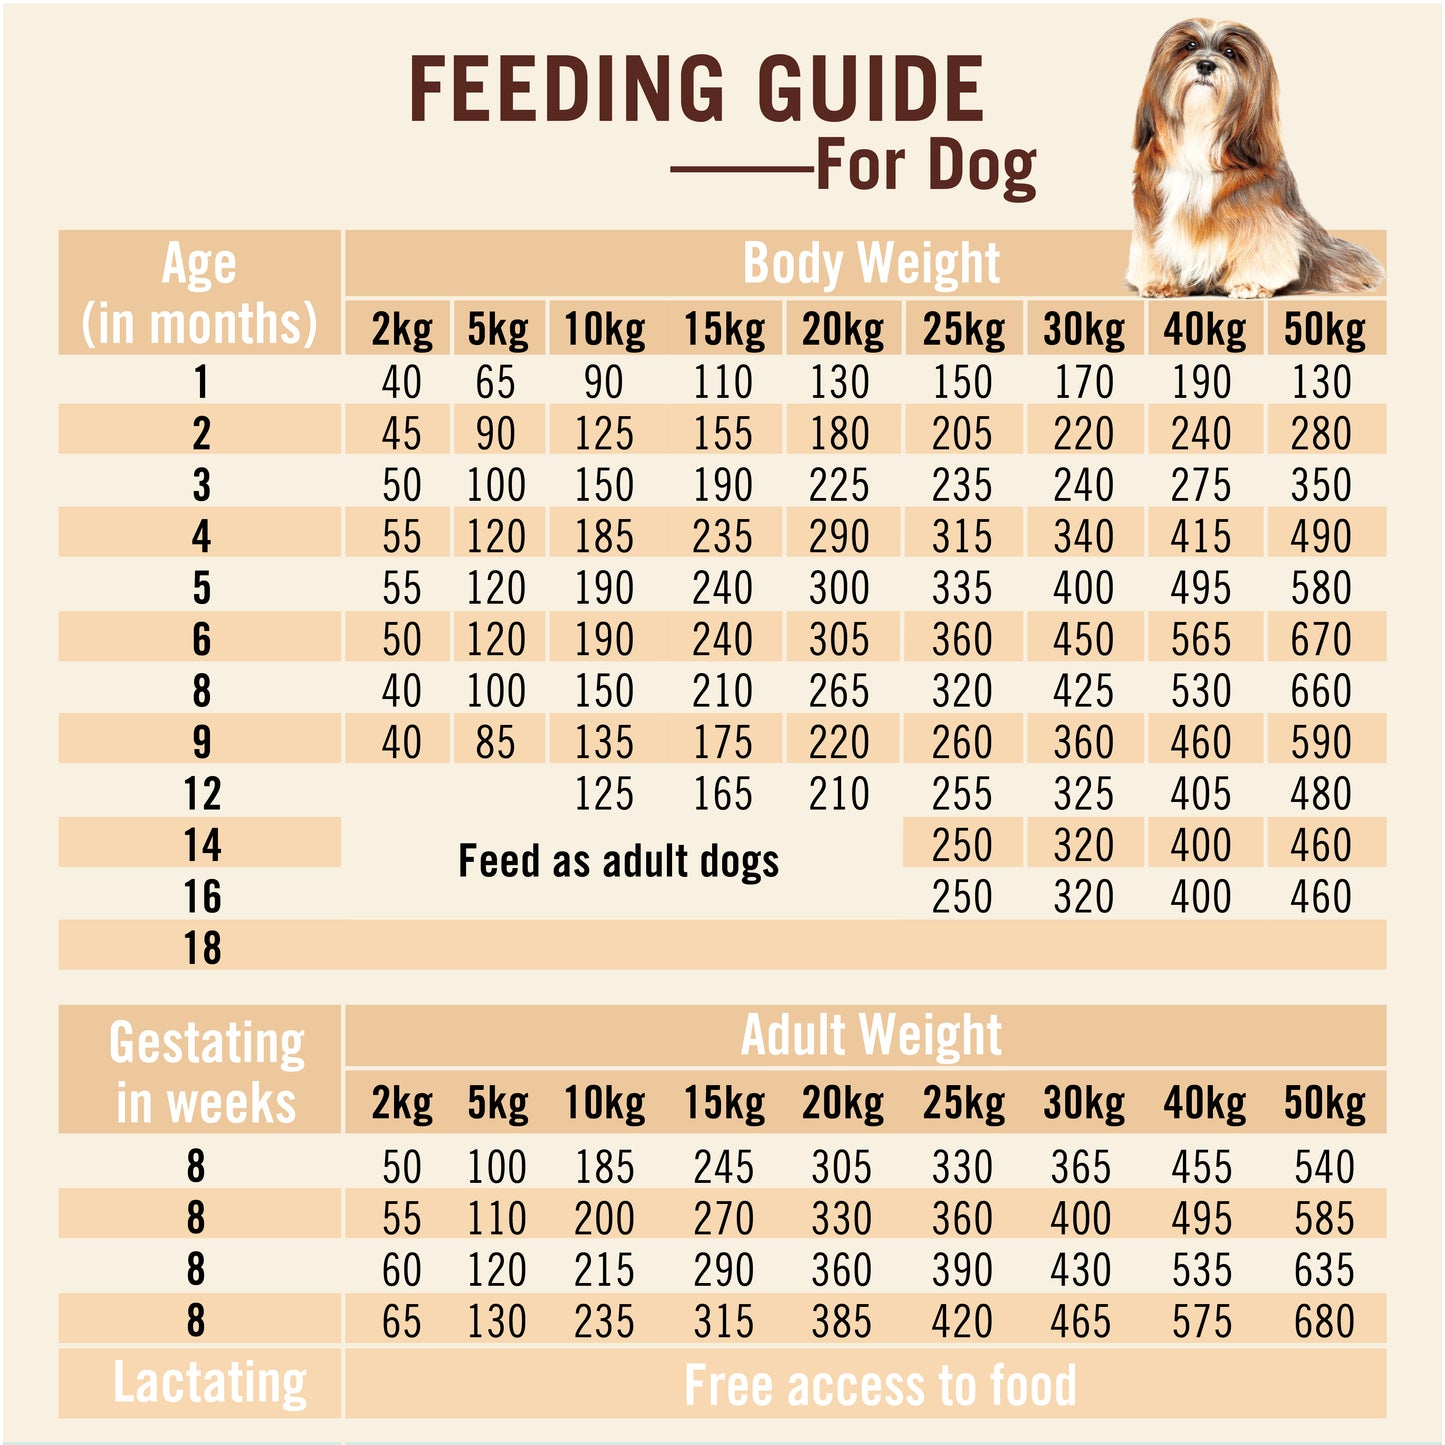 NatureBridge-Beauty Dog - Complete Food - All Life Stages- Feeding Guide